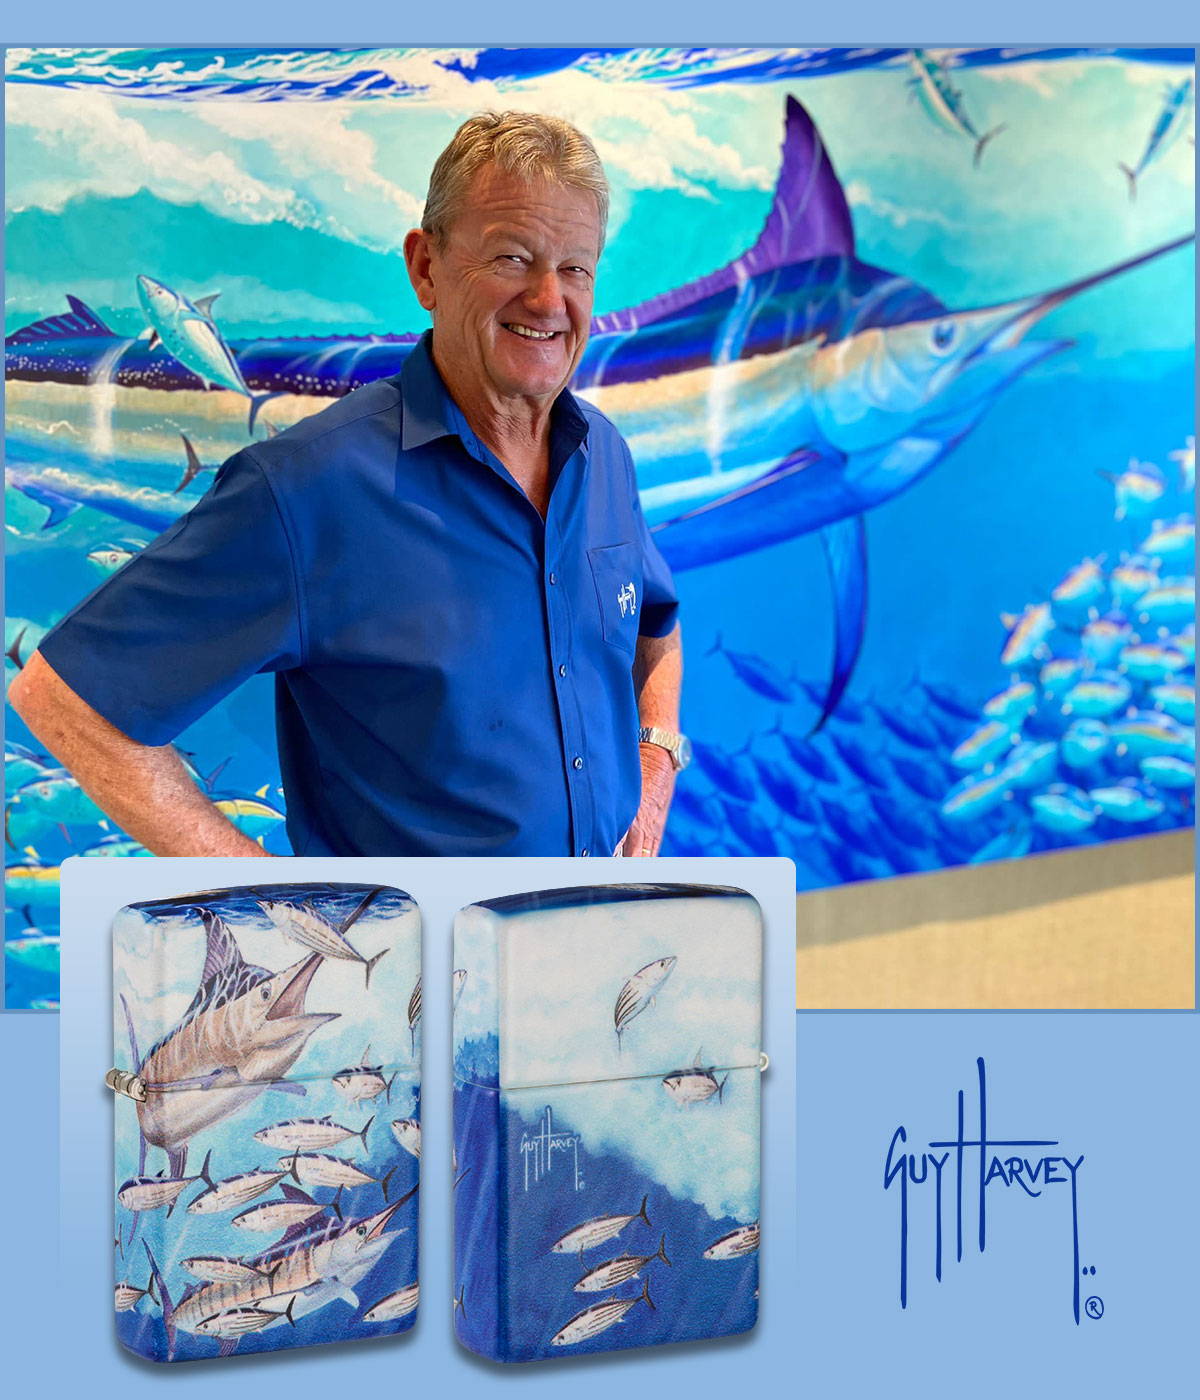 Guy Harvey with his latest lighter design.